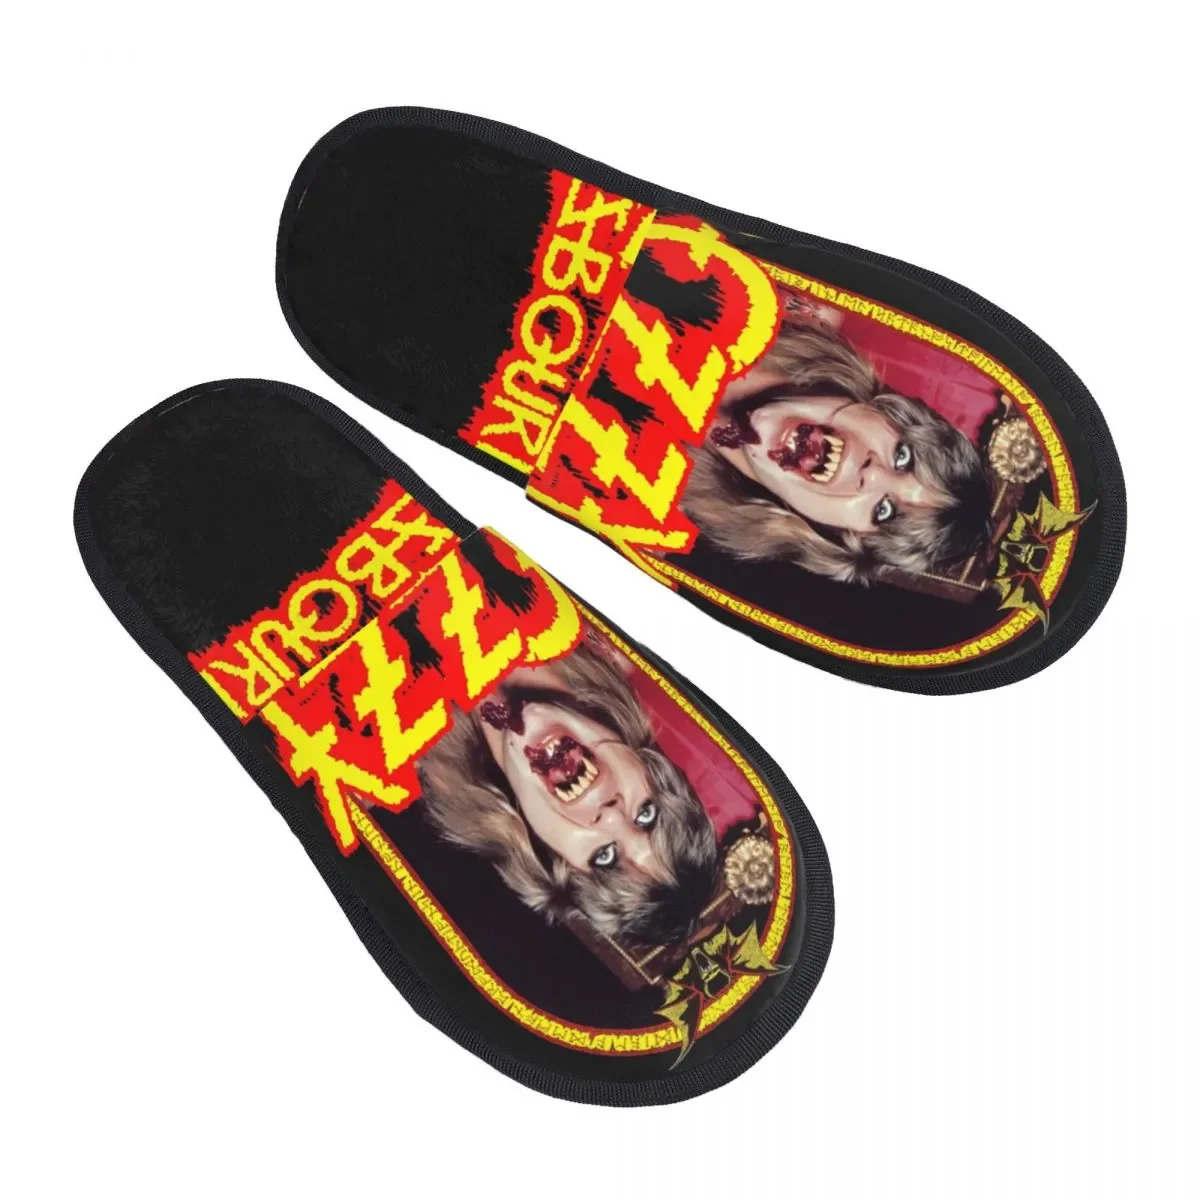 

Ozzy Osbourne British Rock Heavy Metal Singer Comfy Scuff With Memory Foam Slippers Women Spa House Shoes